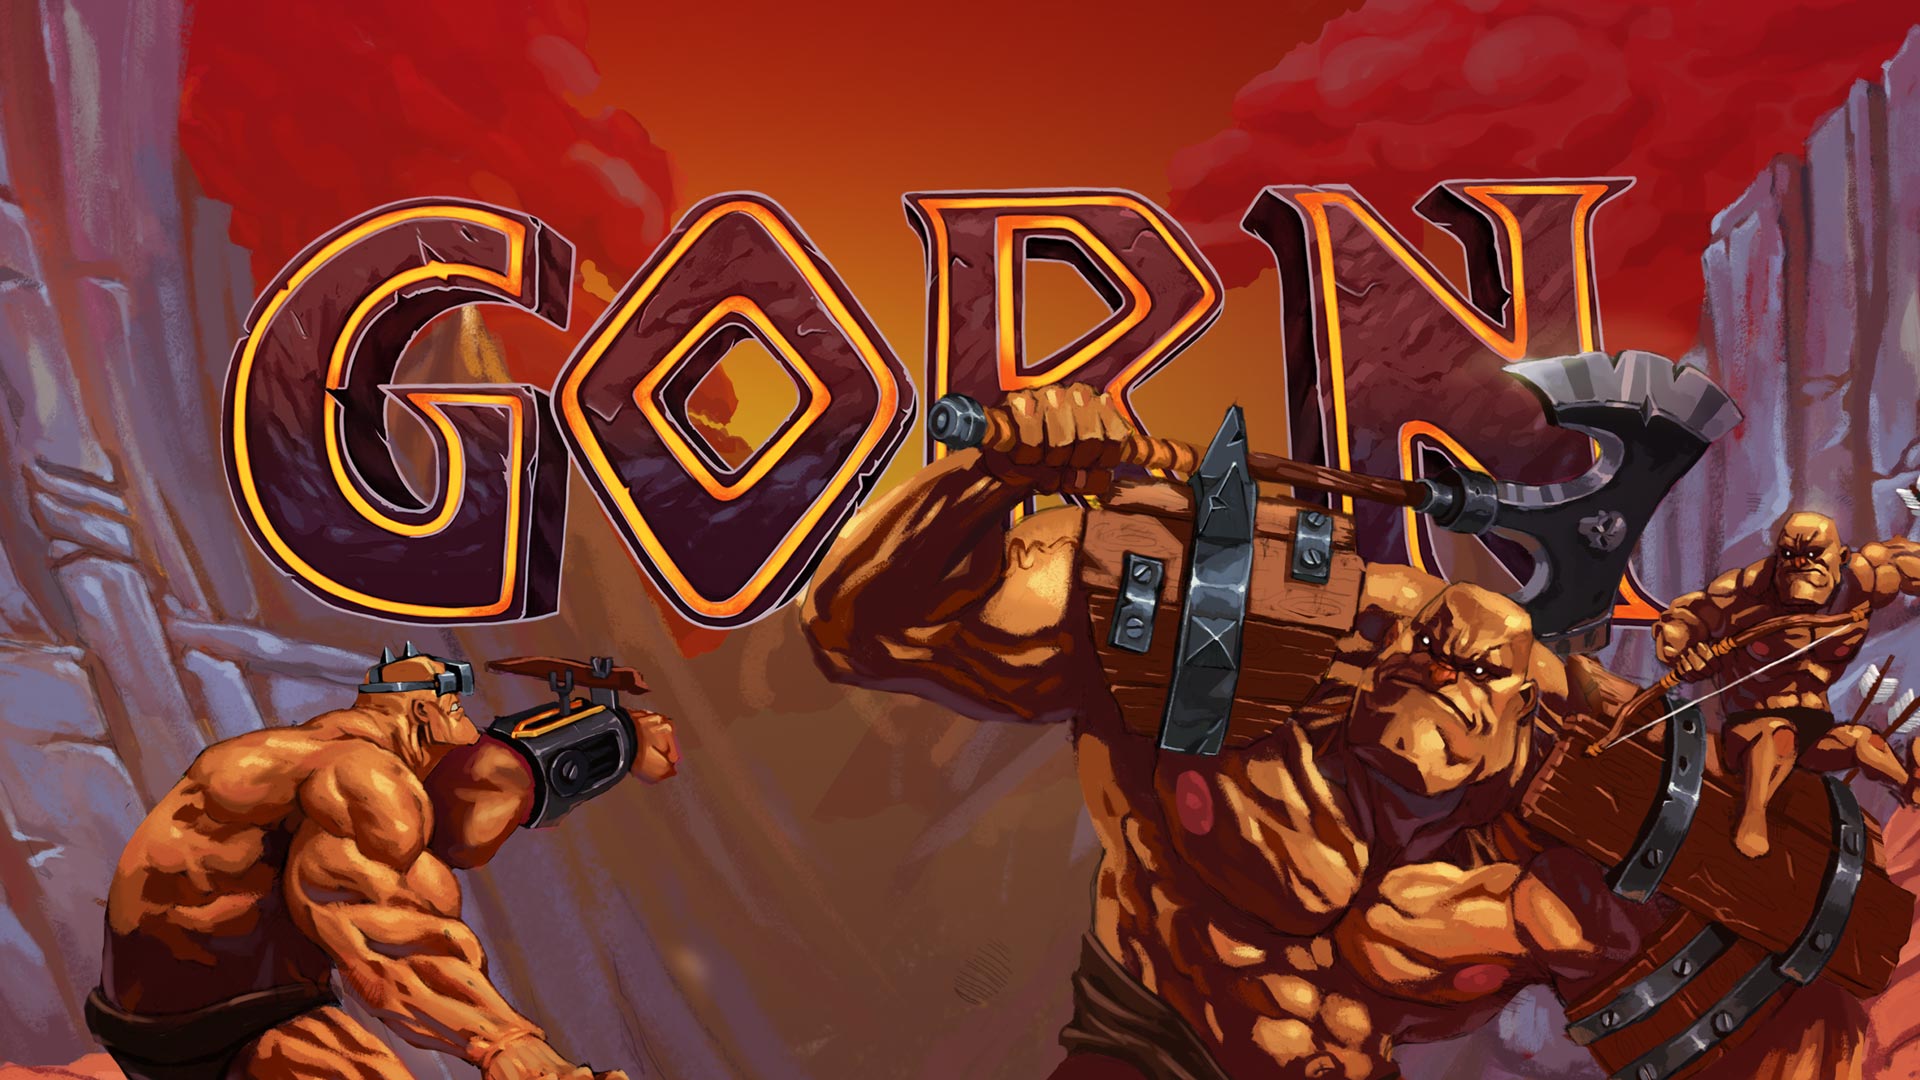 The GORN PC Latest Version Game Free Download